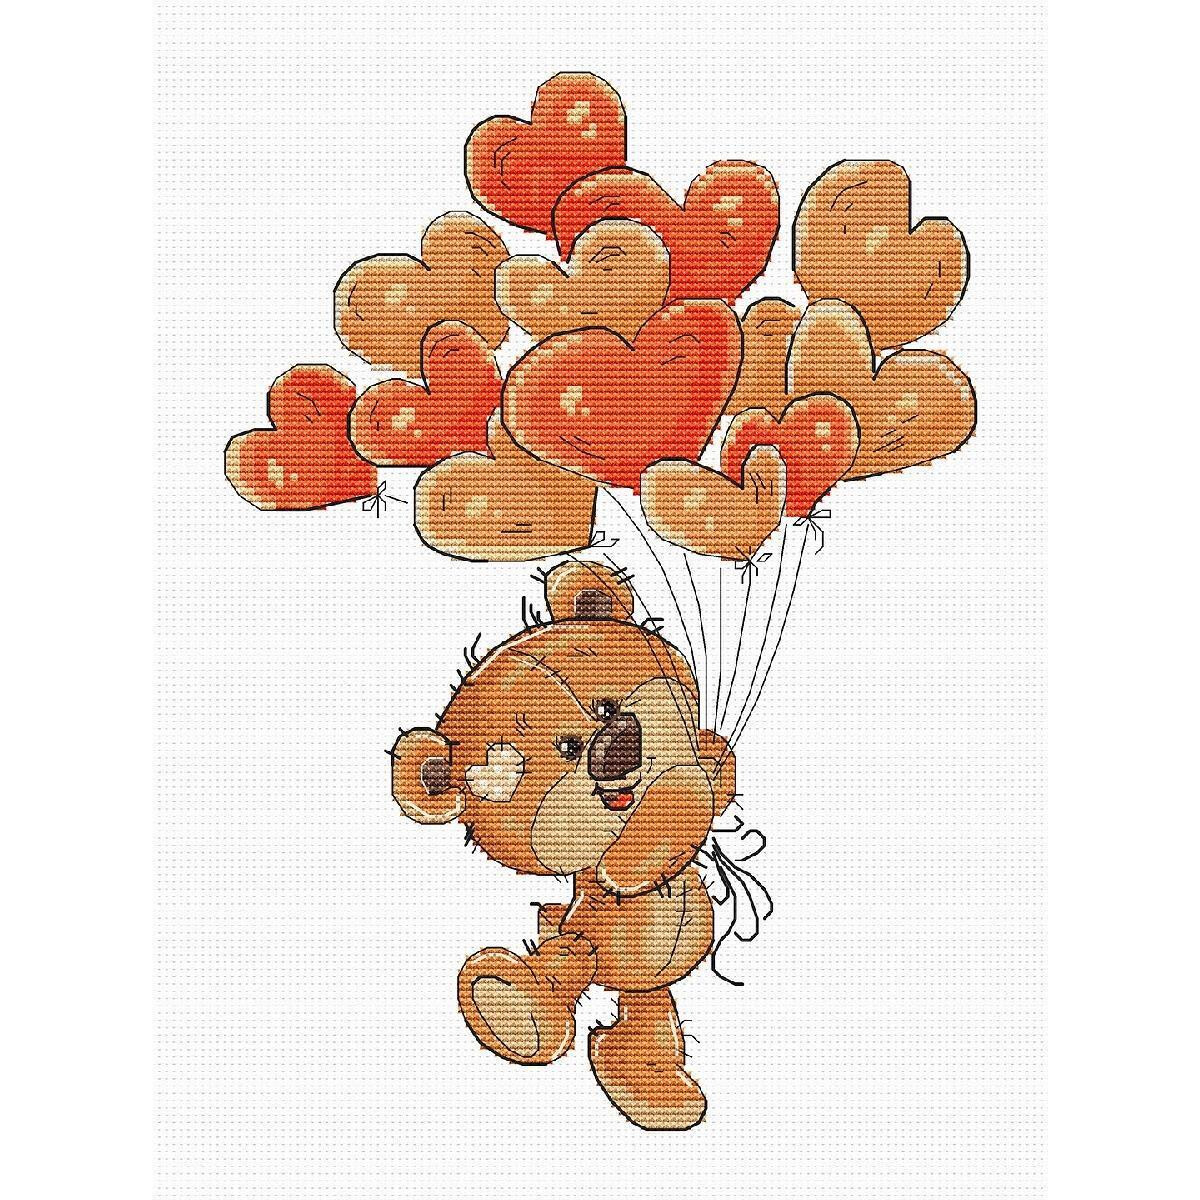 Luca-S counted Cross Stitch kit "Teddy-bear with...